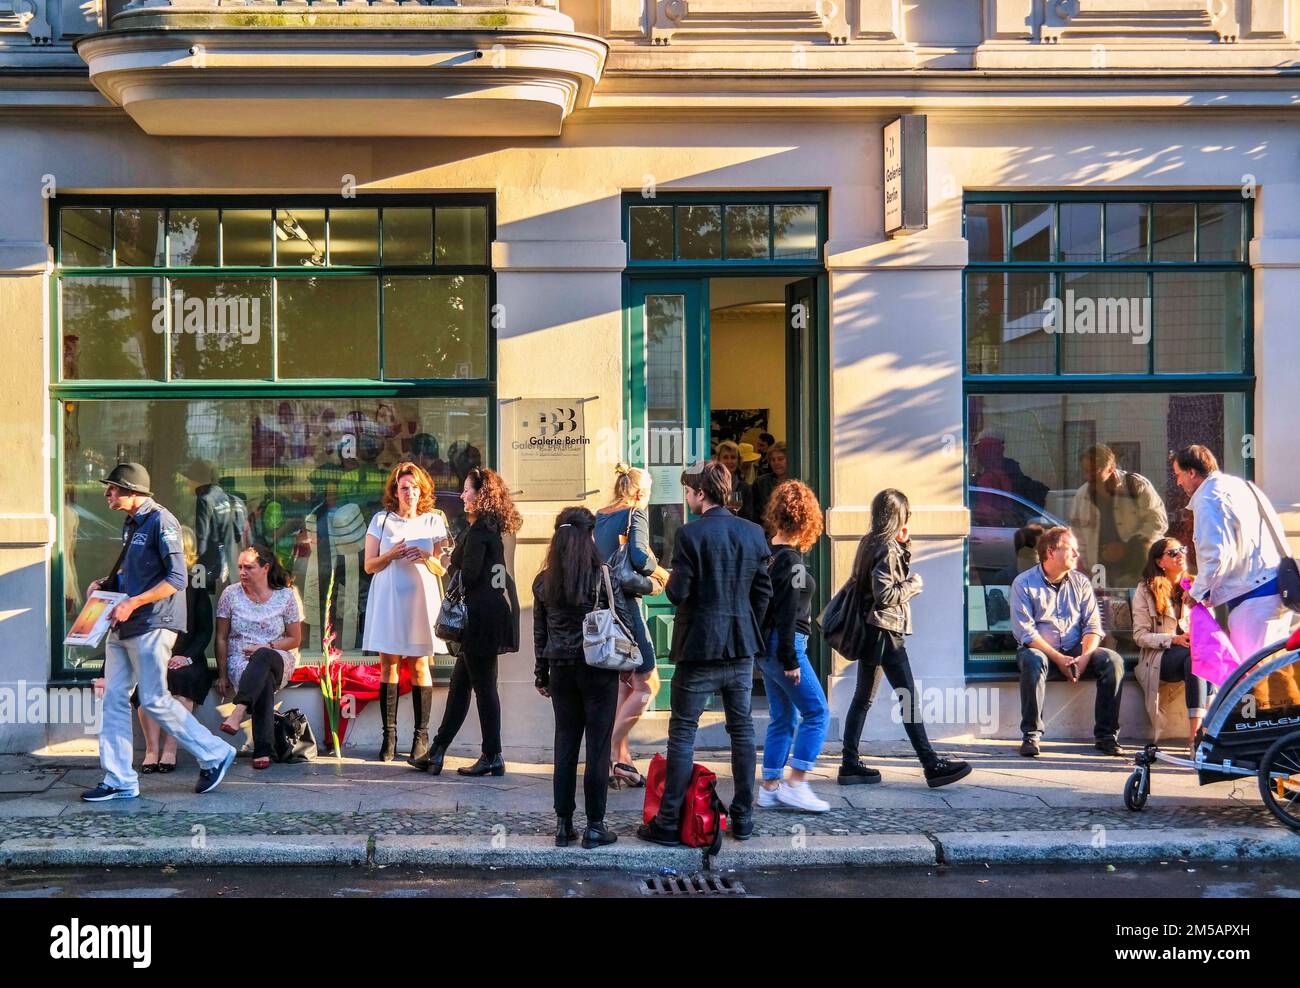 Berlin Mitte, galery opening, people standing in front of big windows Stock Photo